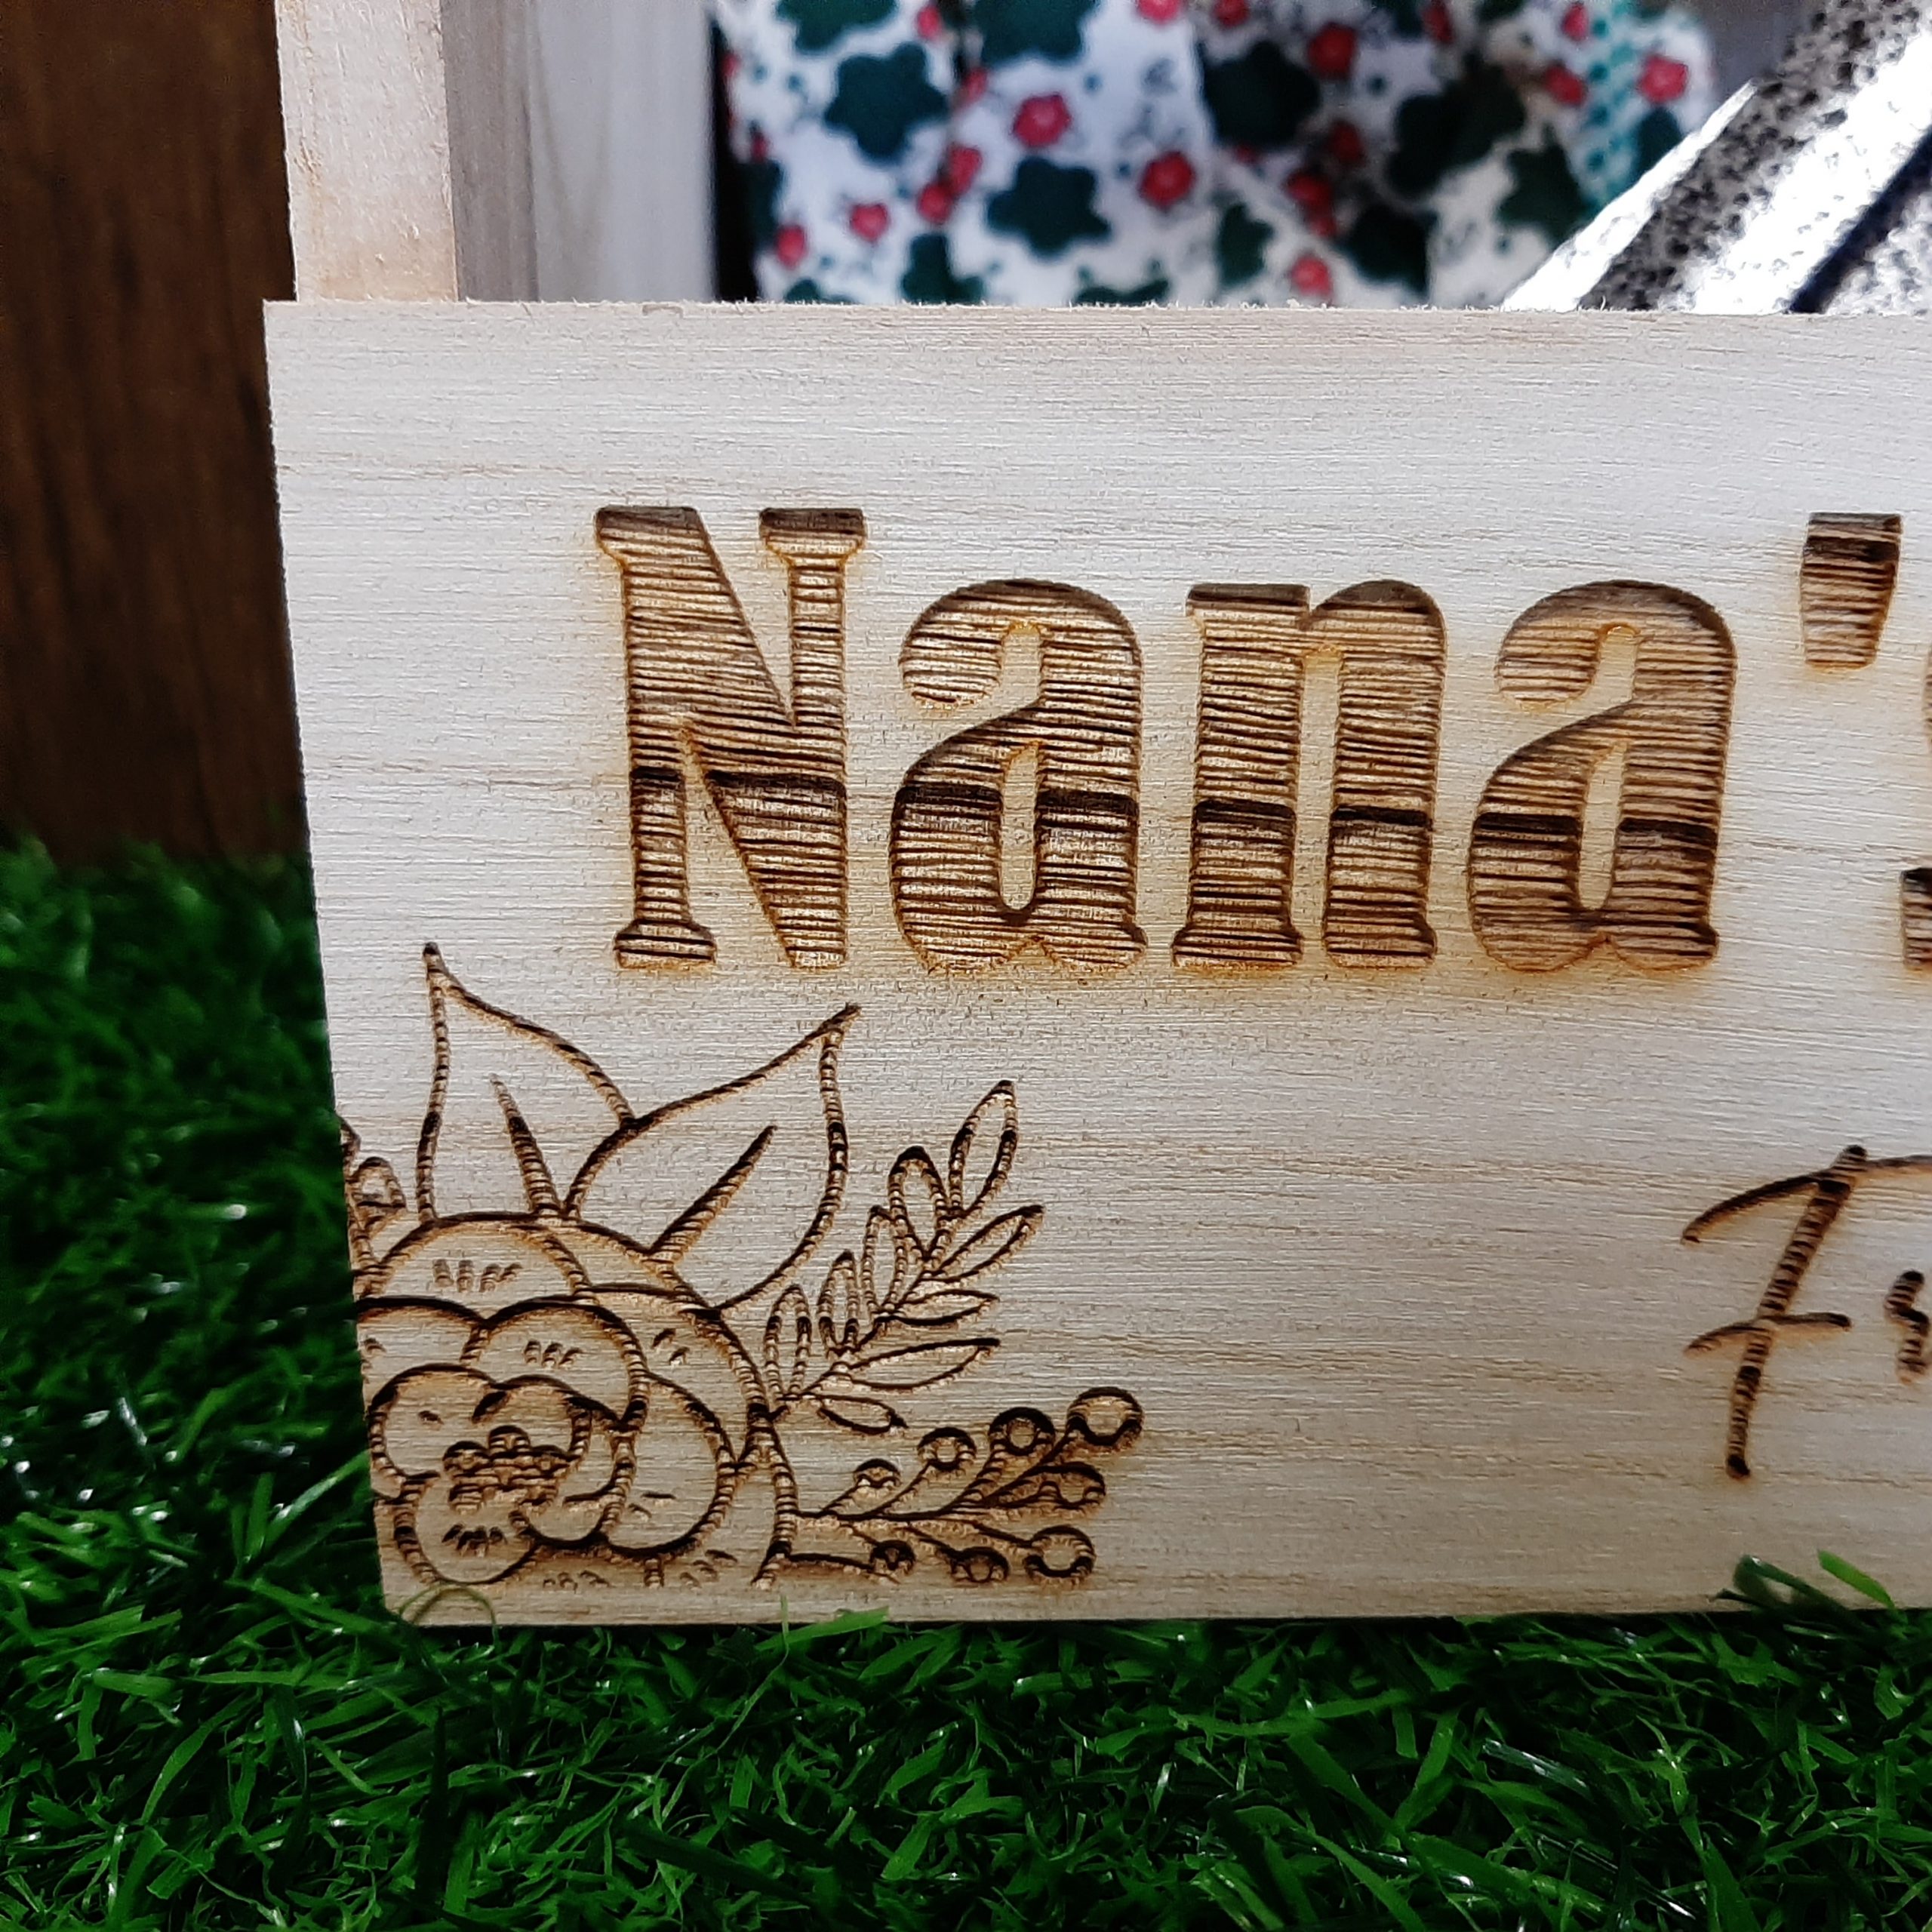 Close up of the engraved flower on the gardening kit